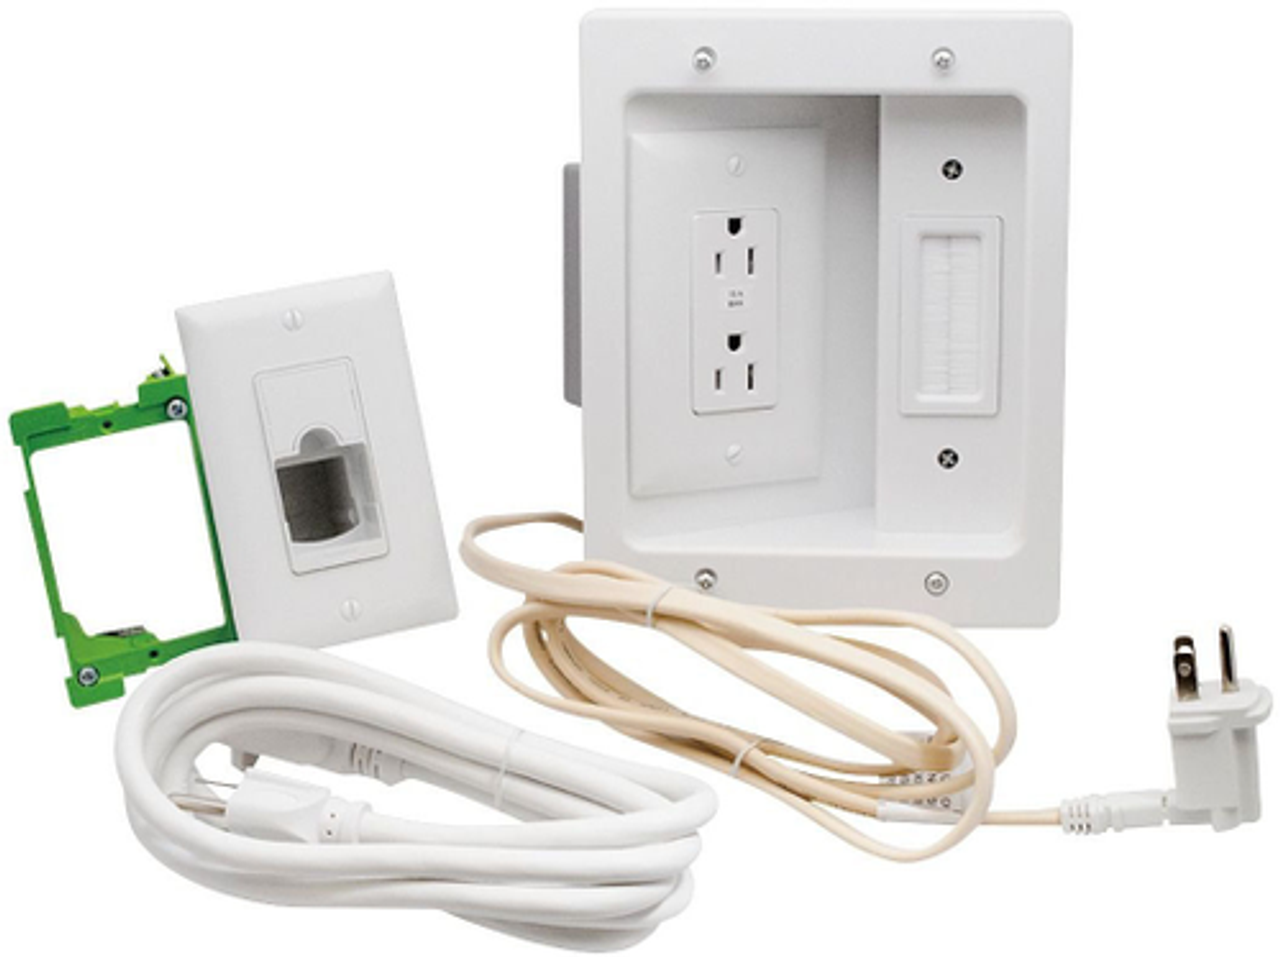 Sanus - In-Wall Cable Concealer Recessed Power Kit - White